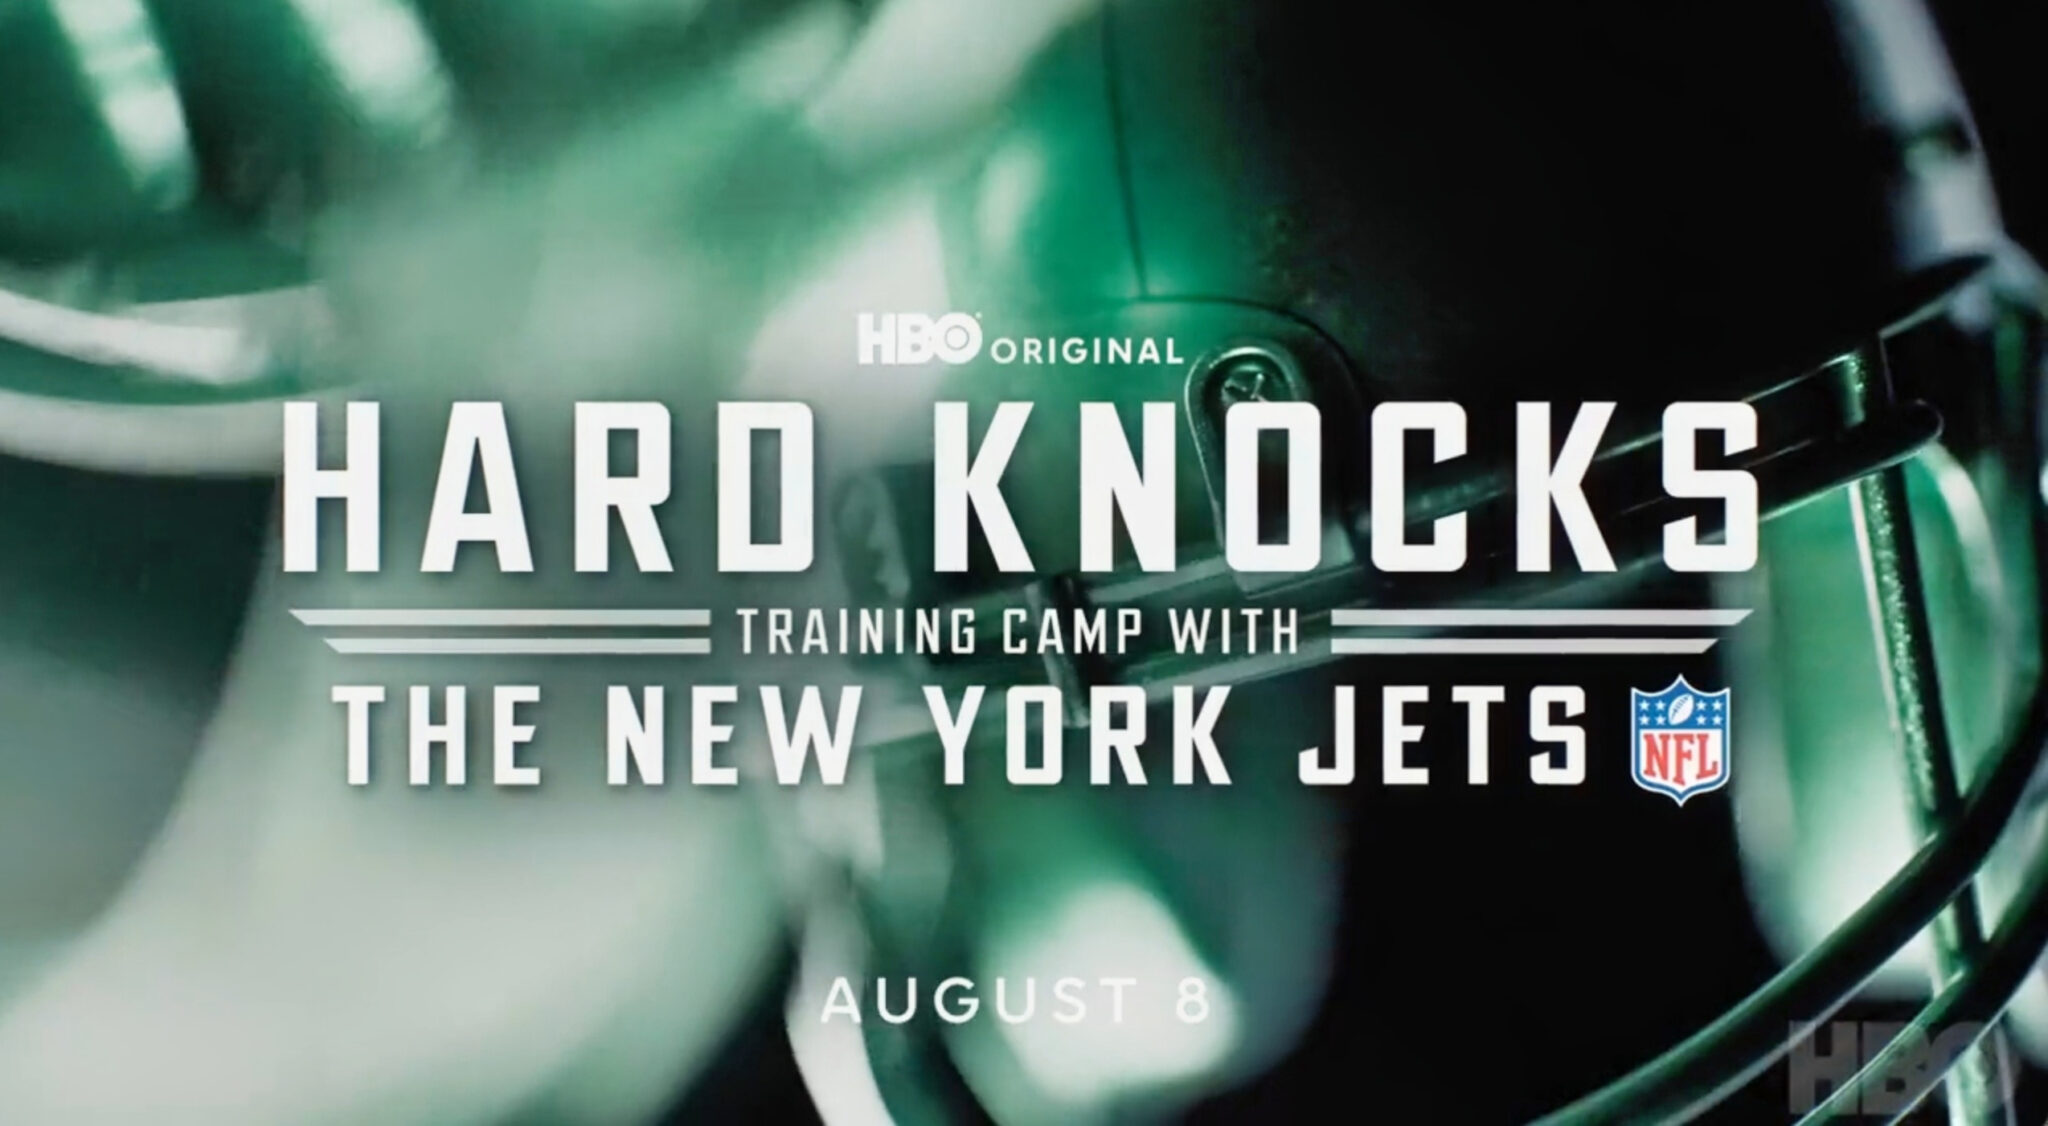 Trailer For Hard Knocks On The New York Jets Has Been Released